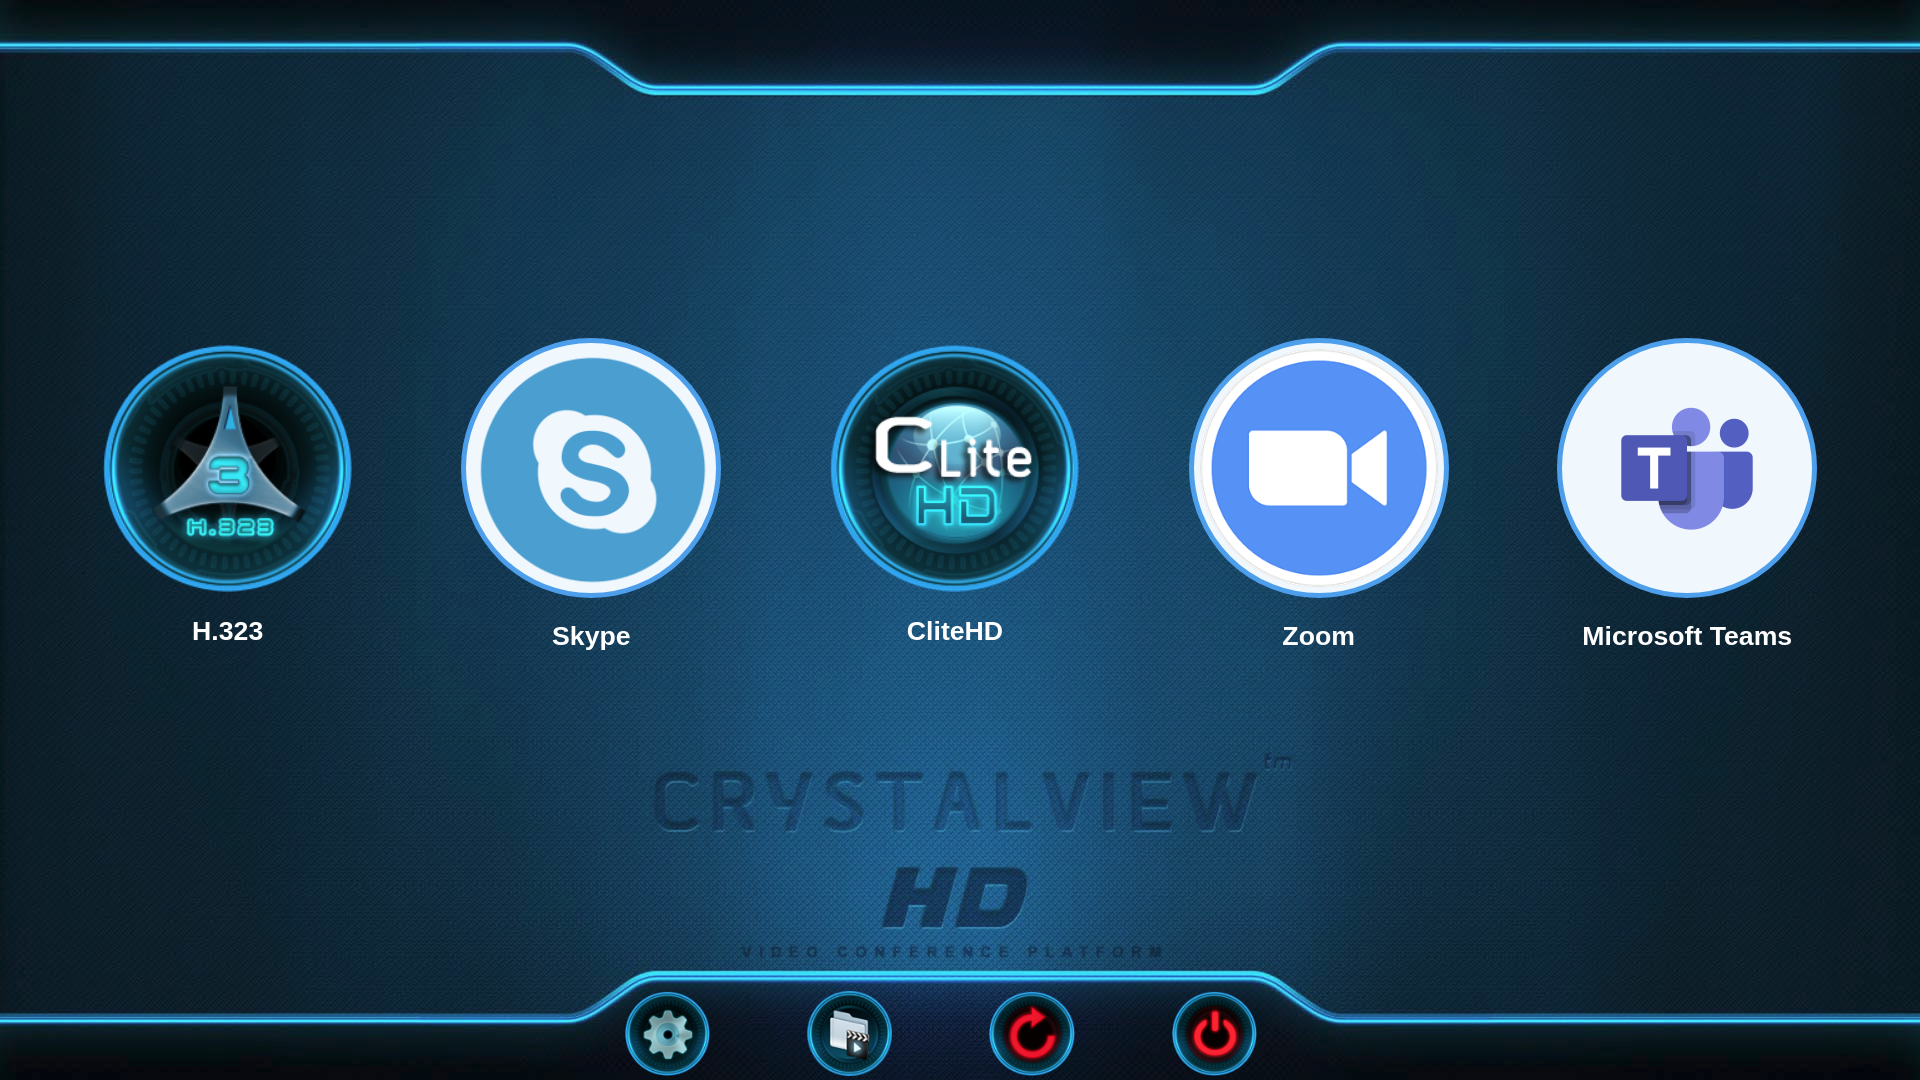 CrystalviewHD Background with Supporting Softwares